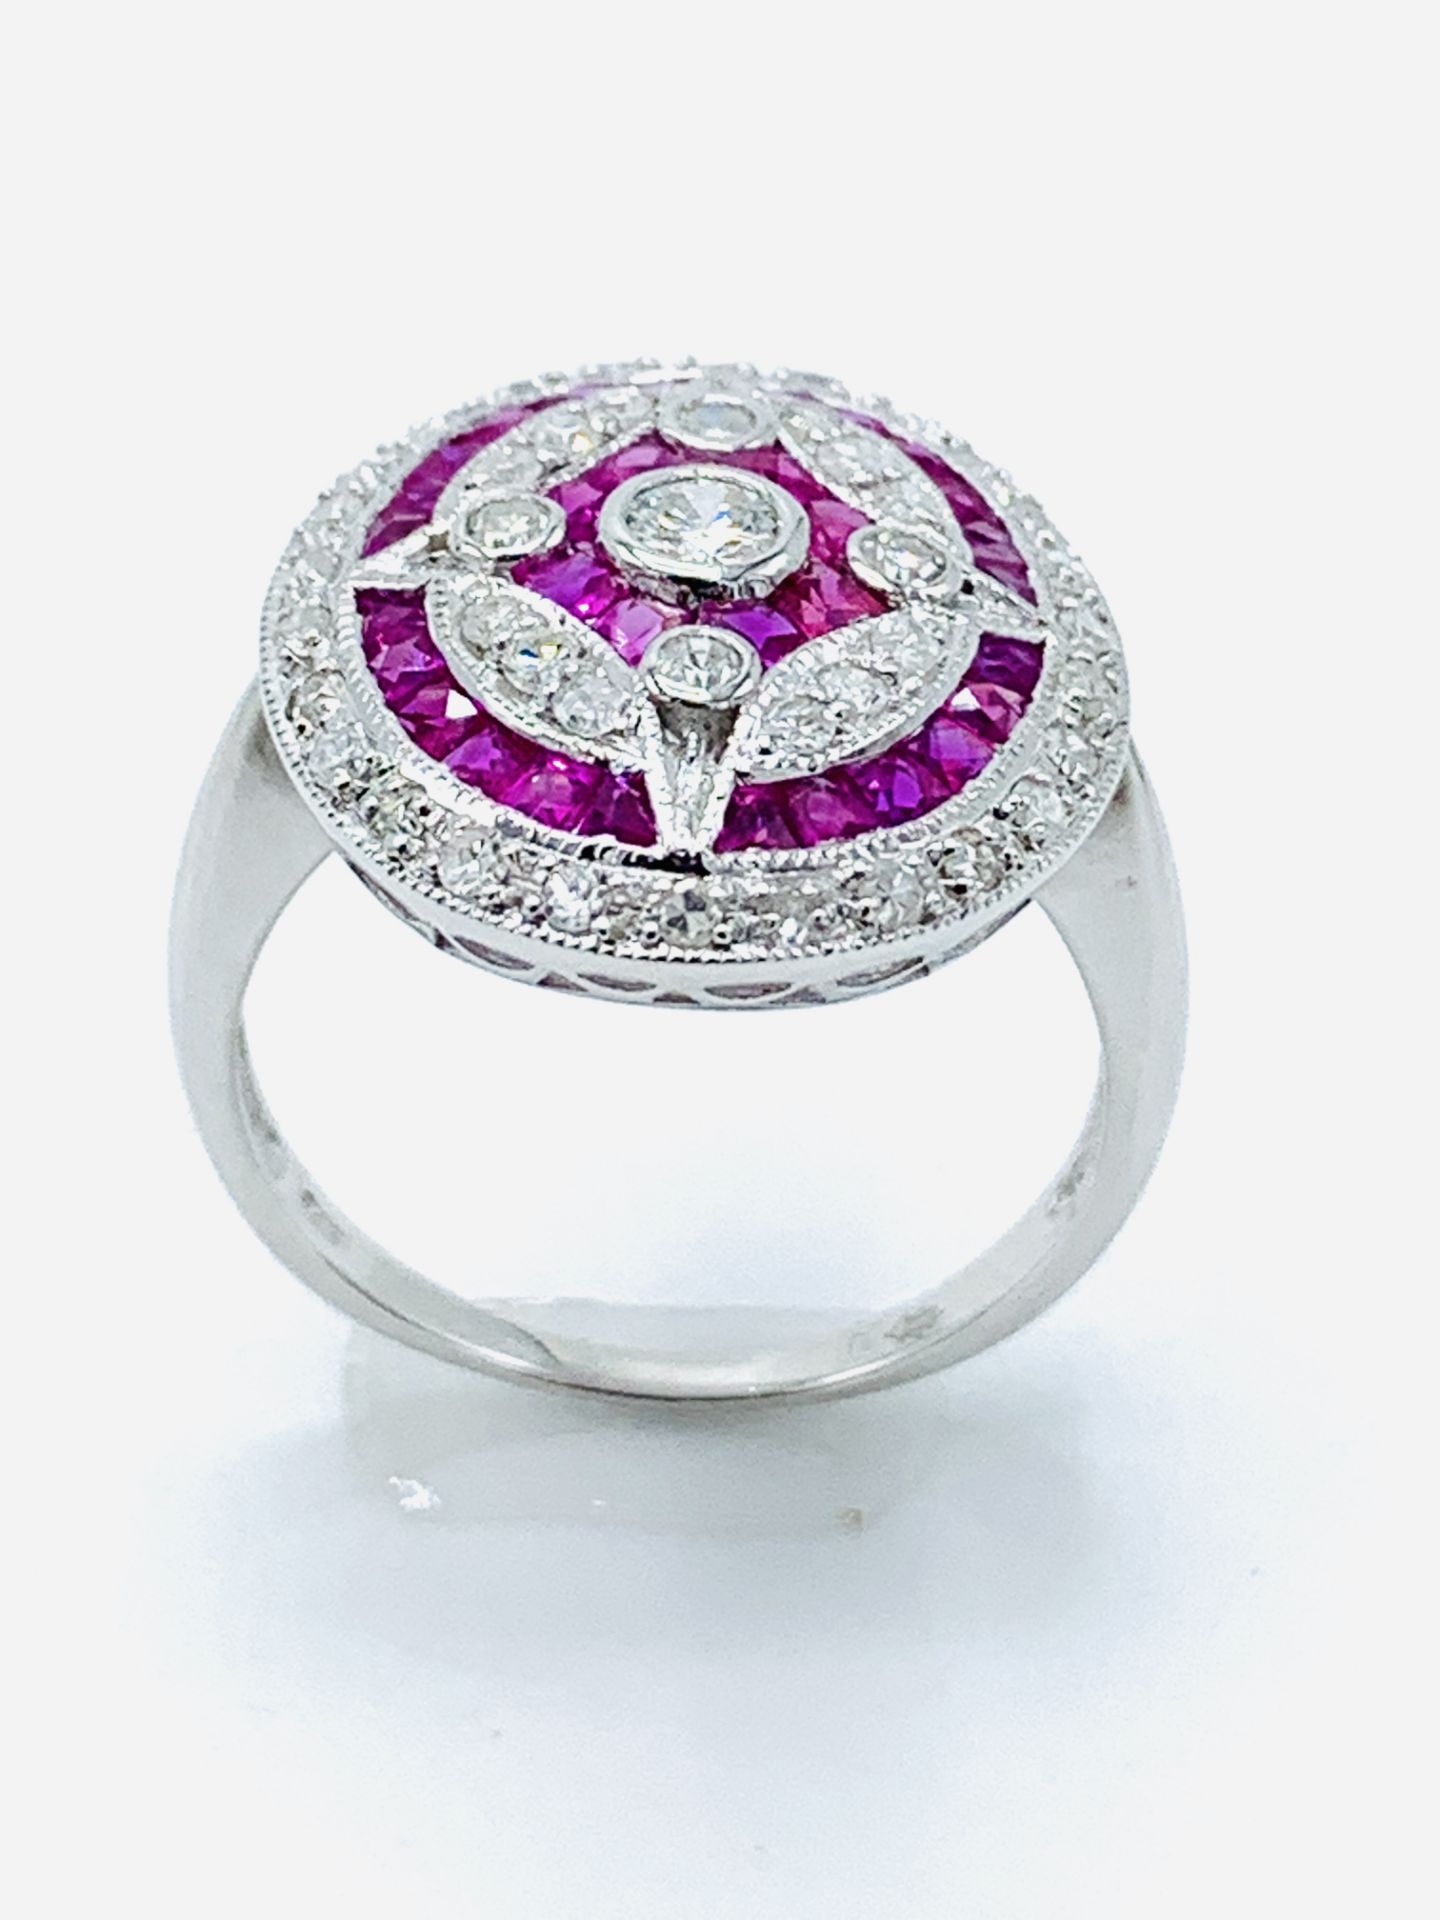 14ct white gold ruby and diamond target ring.